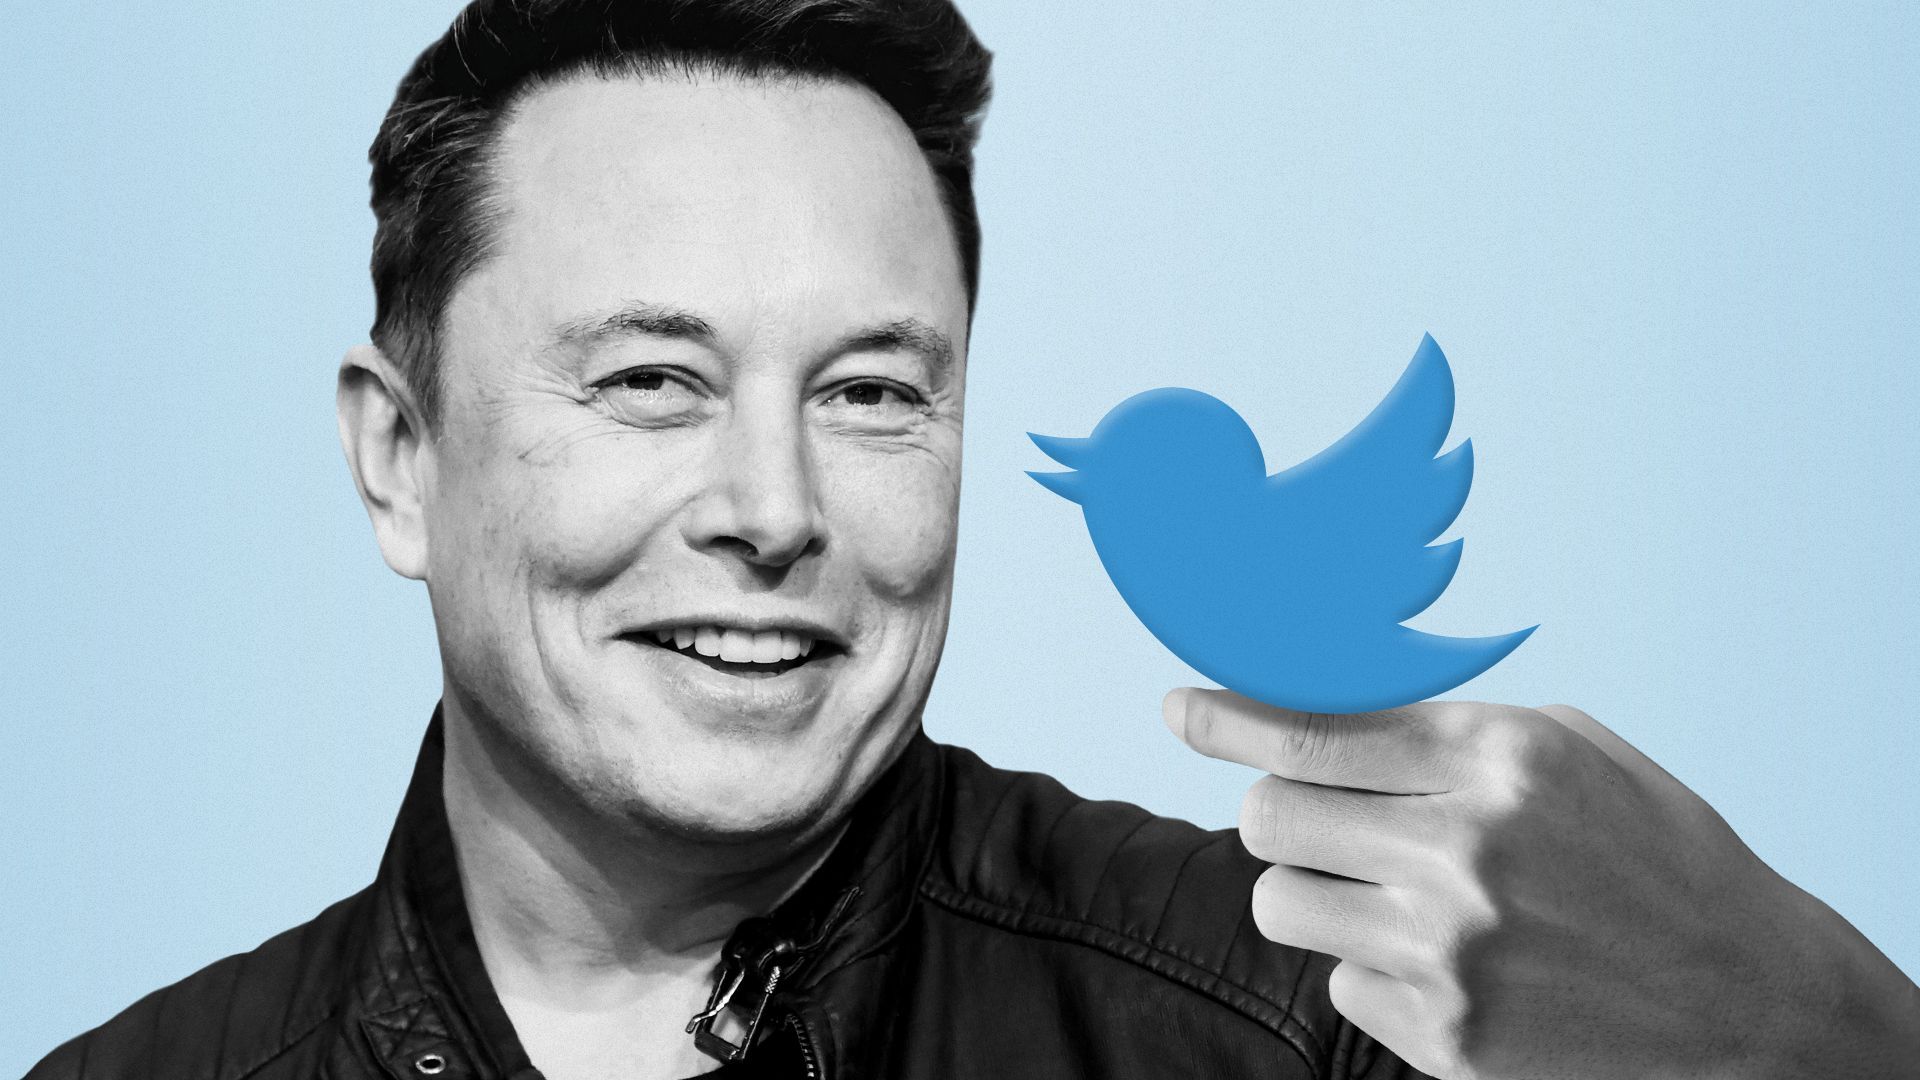 Photo illustration of the Twitter logo perched on Elon Musk's hand.